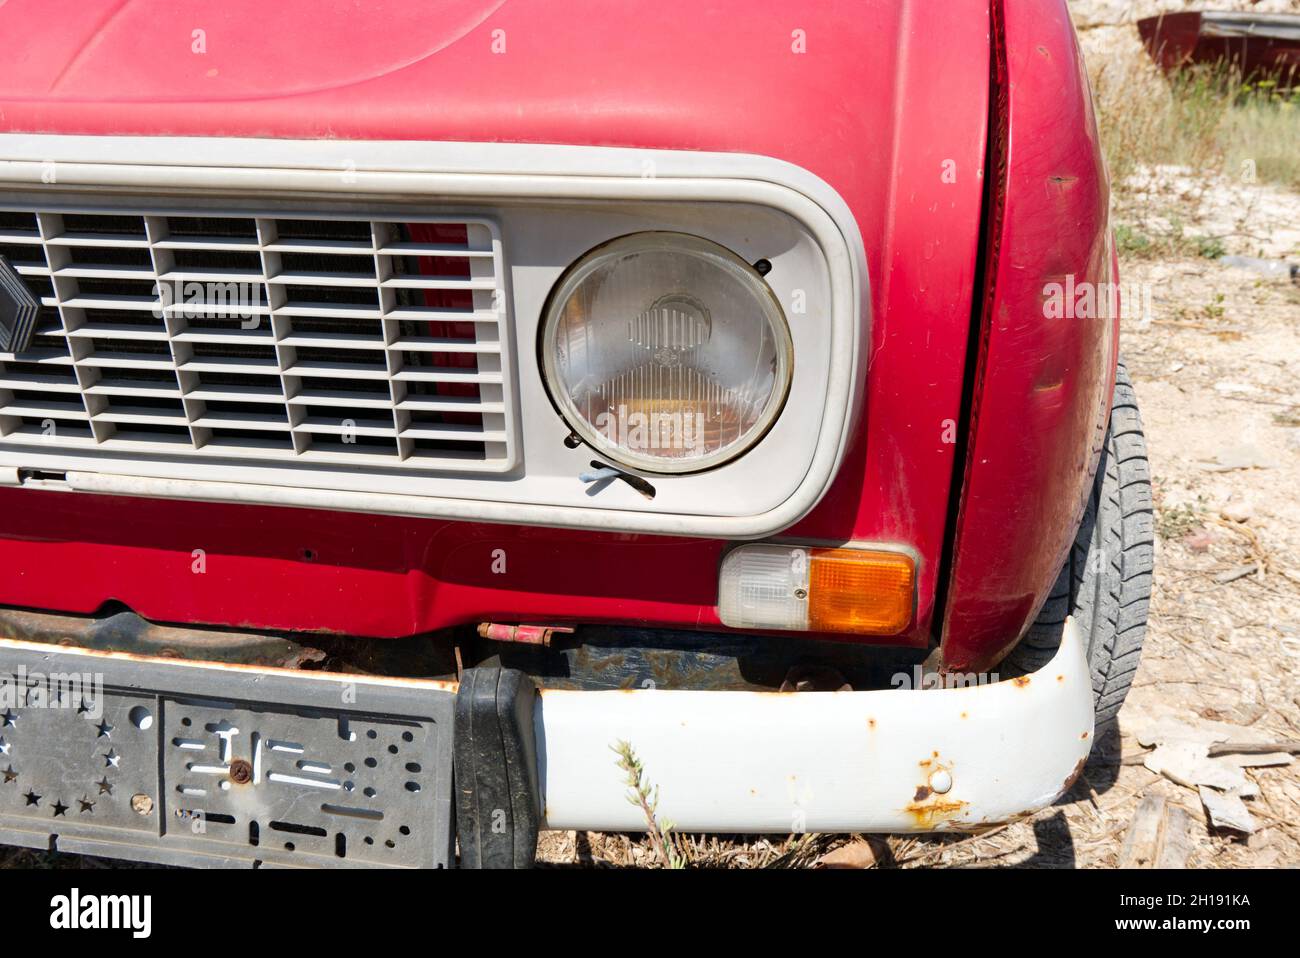 Croatia, August 13 2021. Old red rusty classic car REnault fourTrogir, Stock Photo